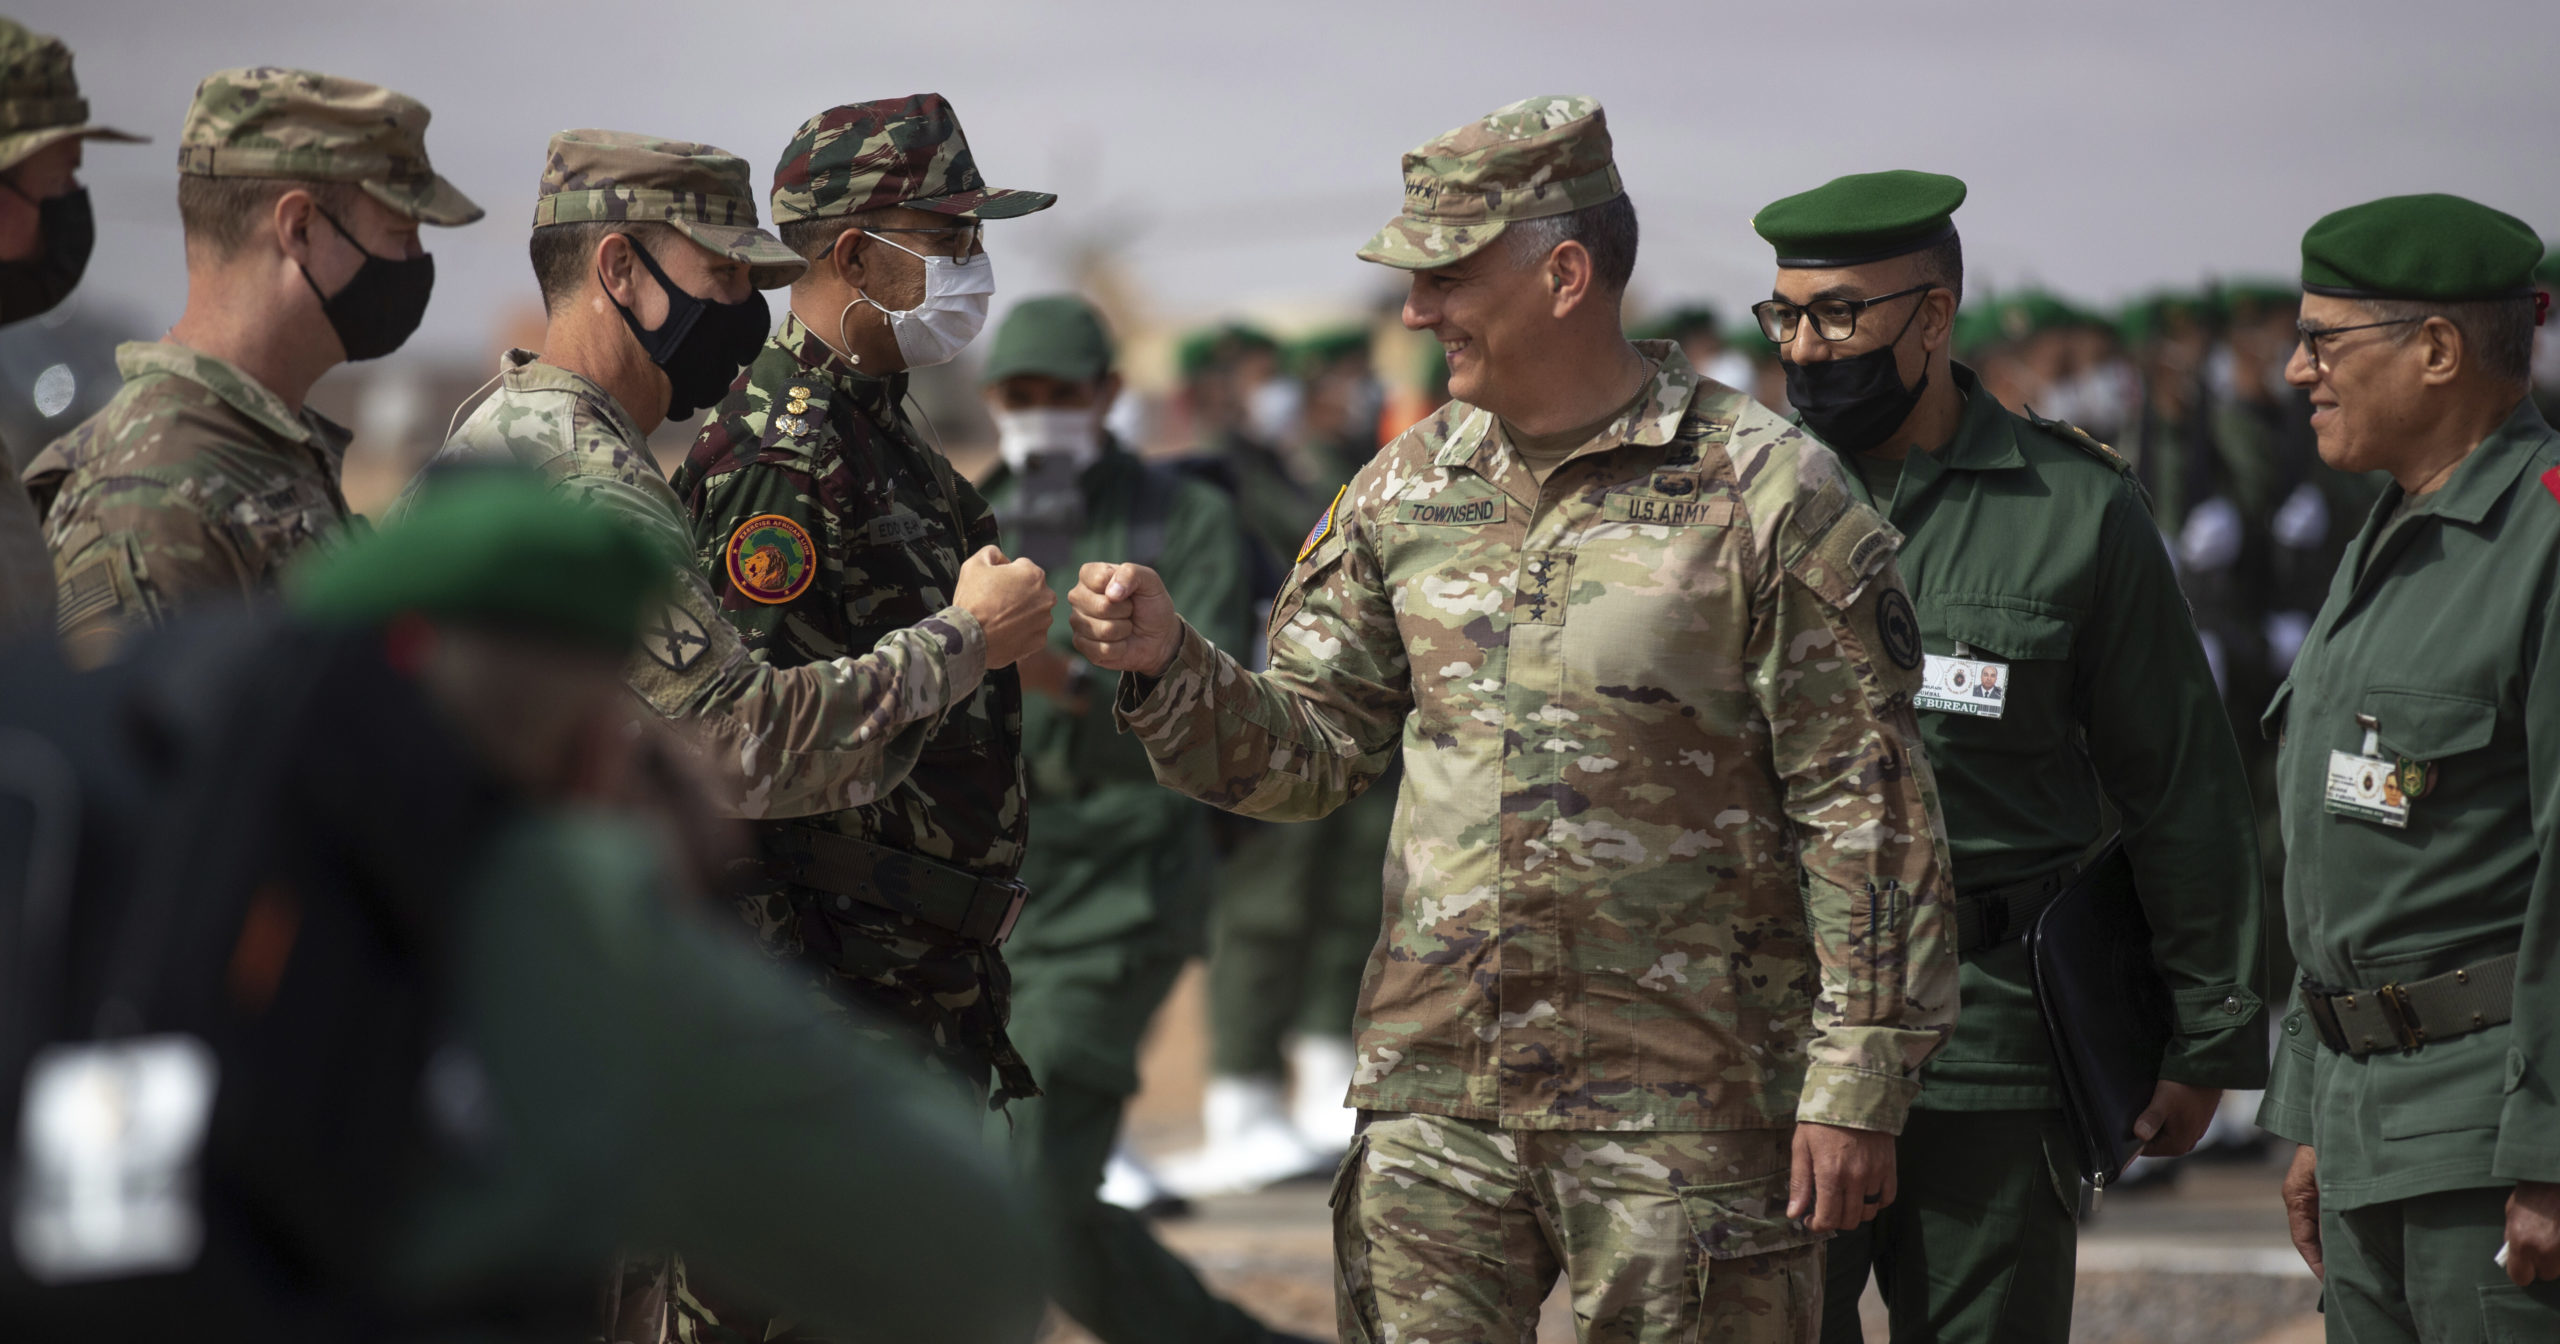 Gen. Stephen J. Townsend, head of U.S. Africa Command, arrives to watch a large-scale drill as part of the African Lion military exercises in Tantan, Morocco, on Friday.